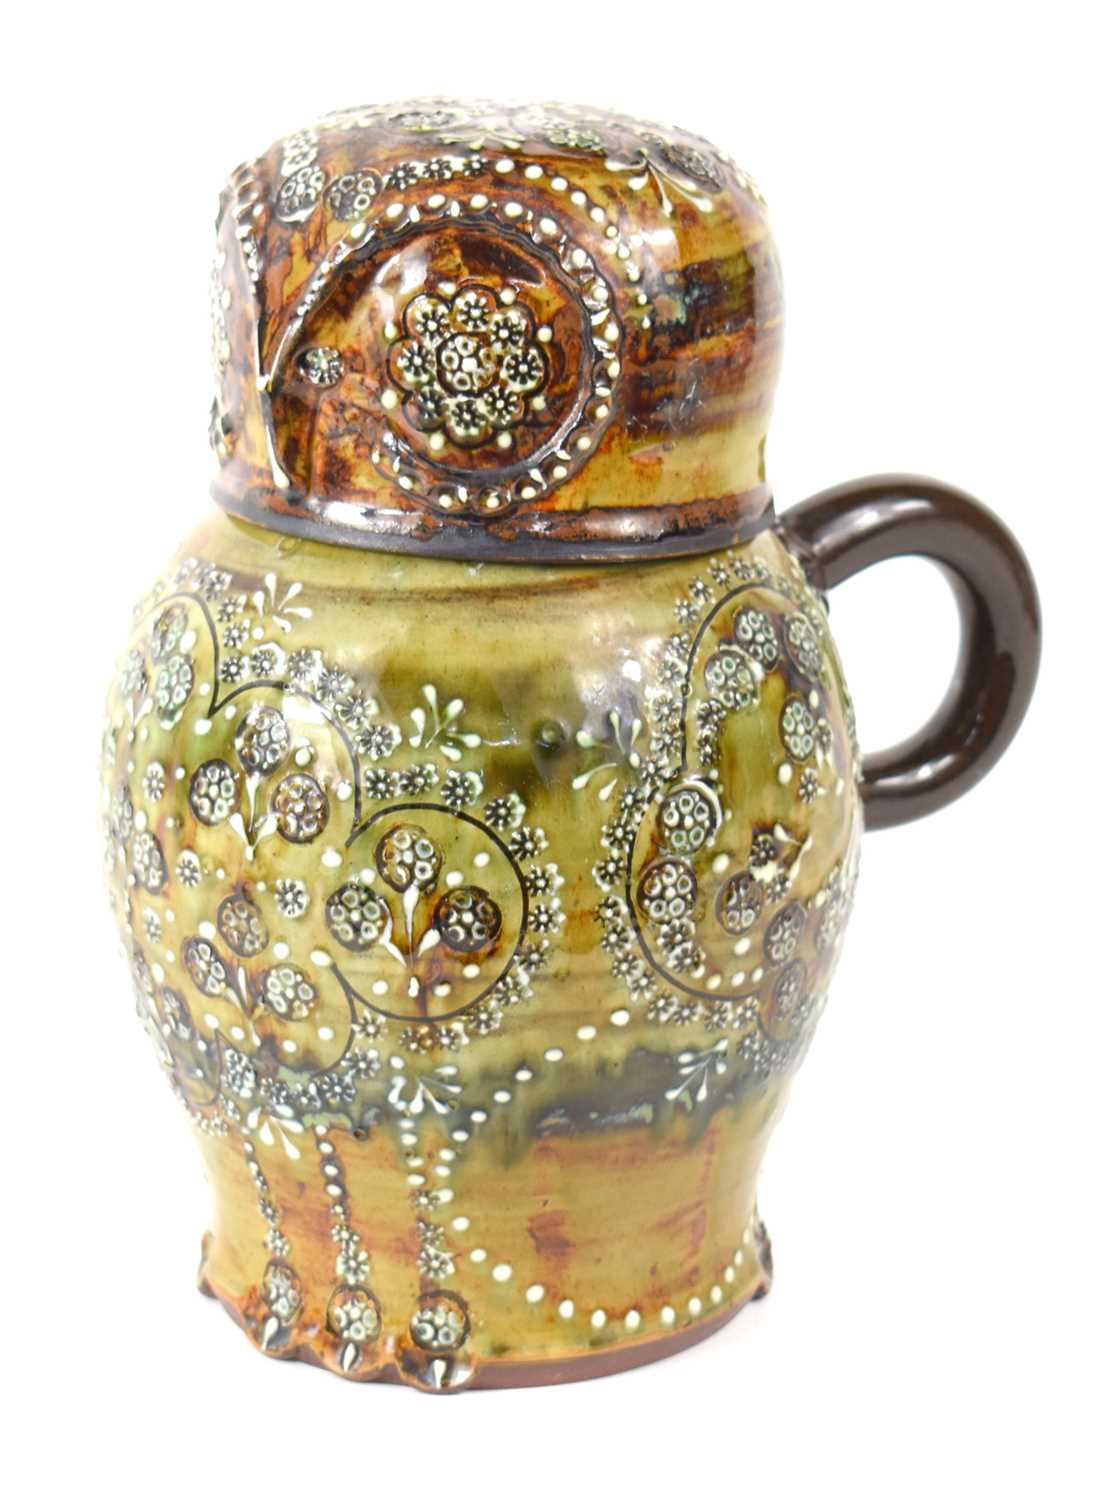 A Leonard Stockley Weymouth pottery slipware jug, modelled in the form of an owl, in green and brown